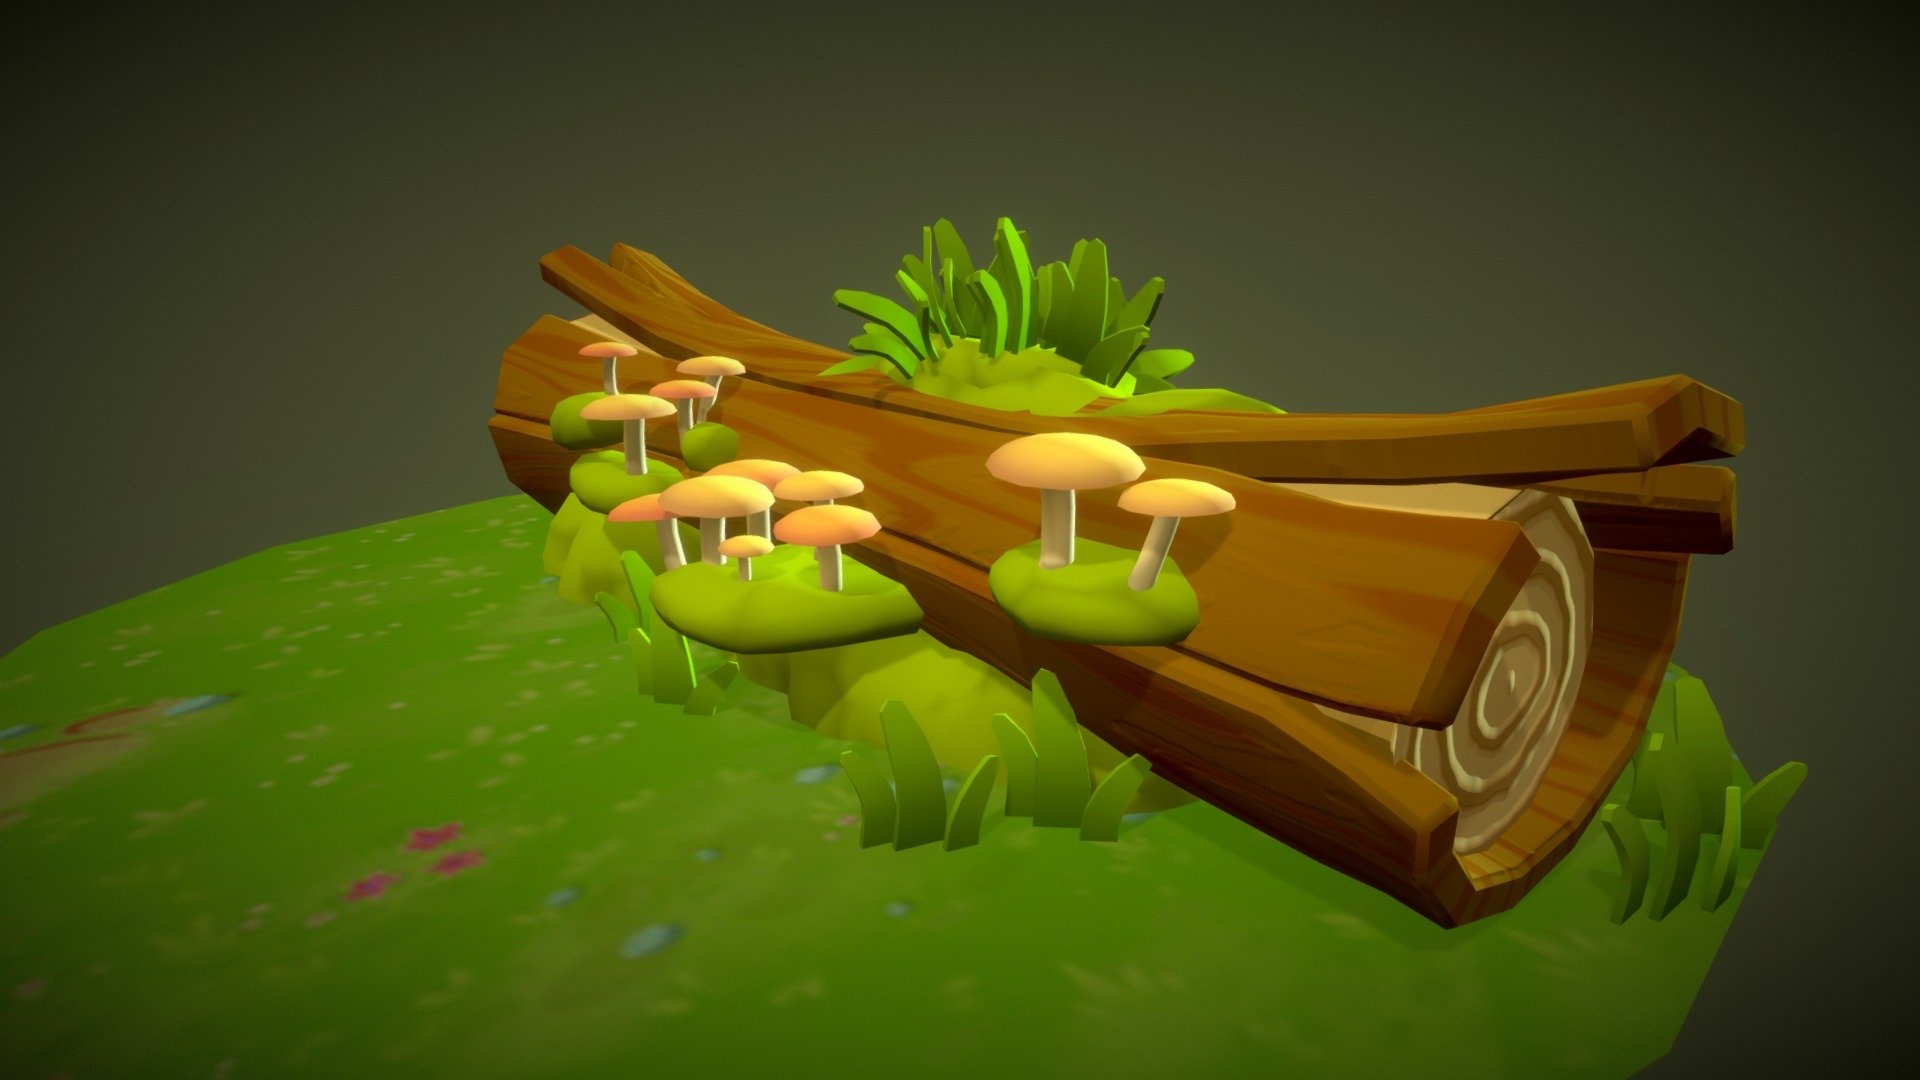 Stylized cartoon fallen tree with moss and mushrooms

Casual graphics

Game asset

Low poly

Textured
 - Cartoon fallen tree - Download Free 3D model by neon_dust (@h_miller) 3d model